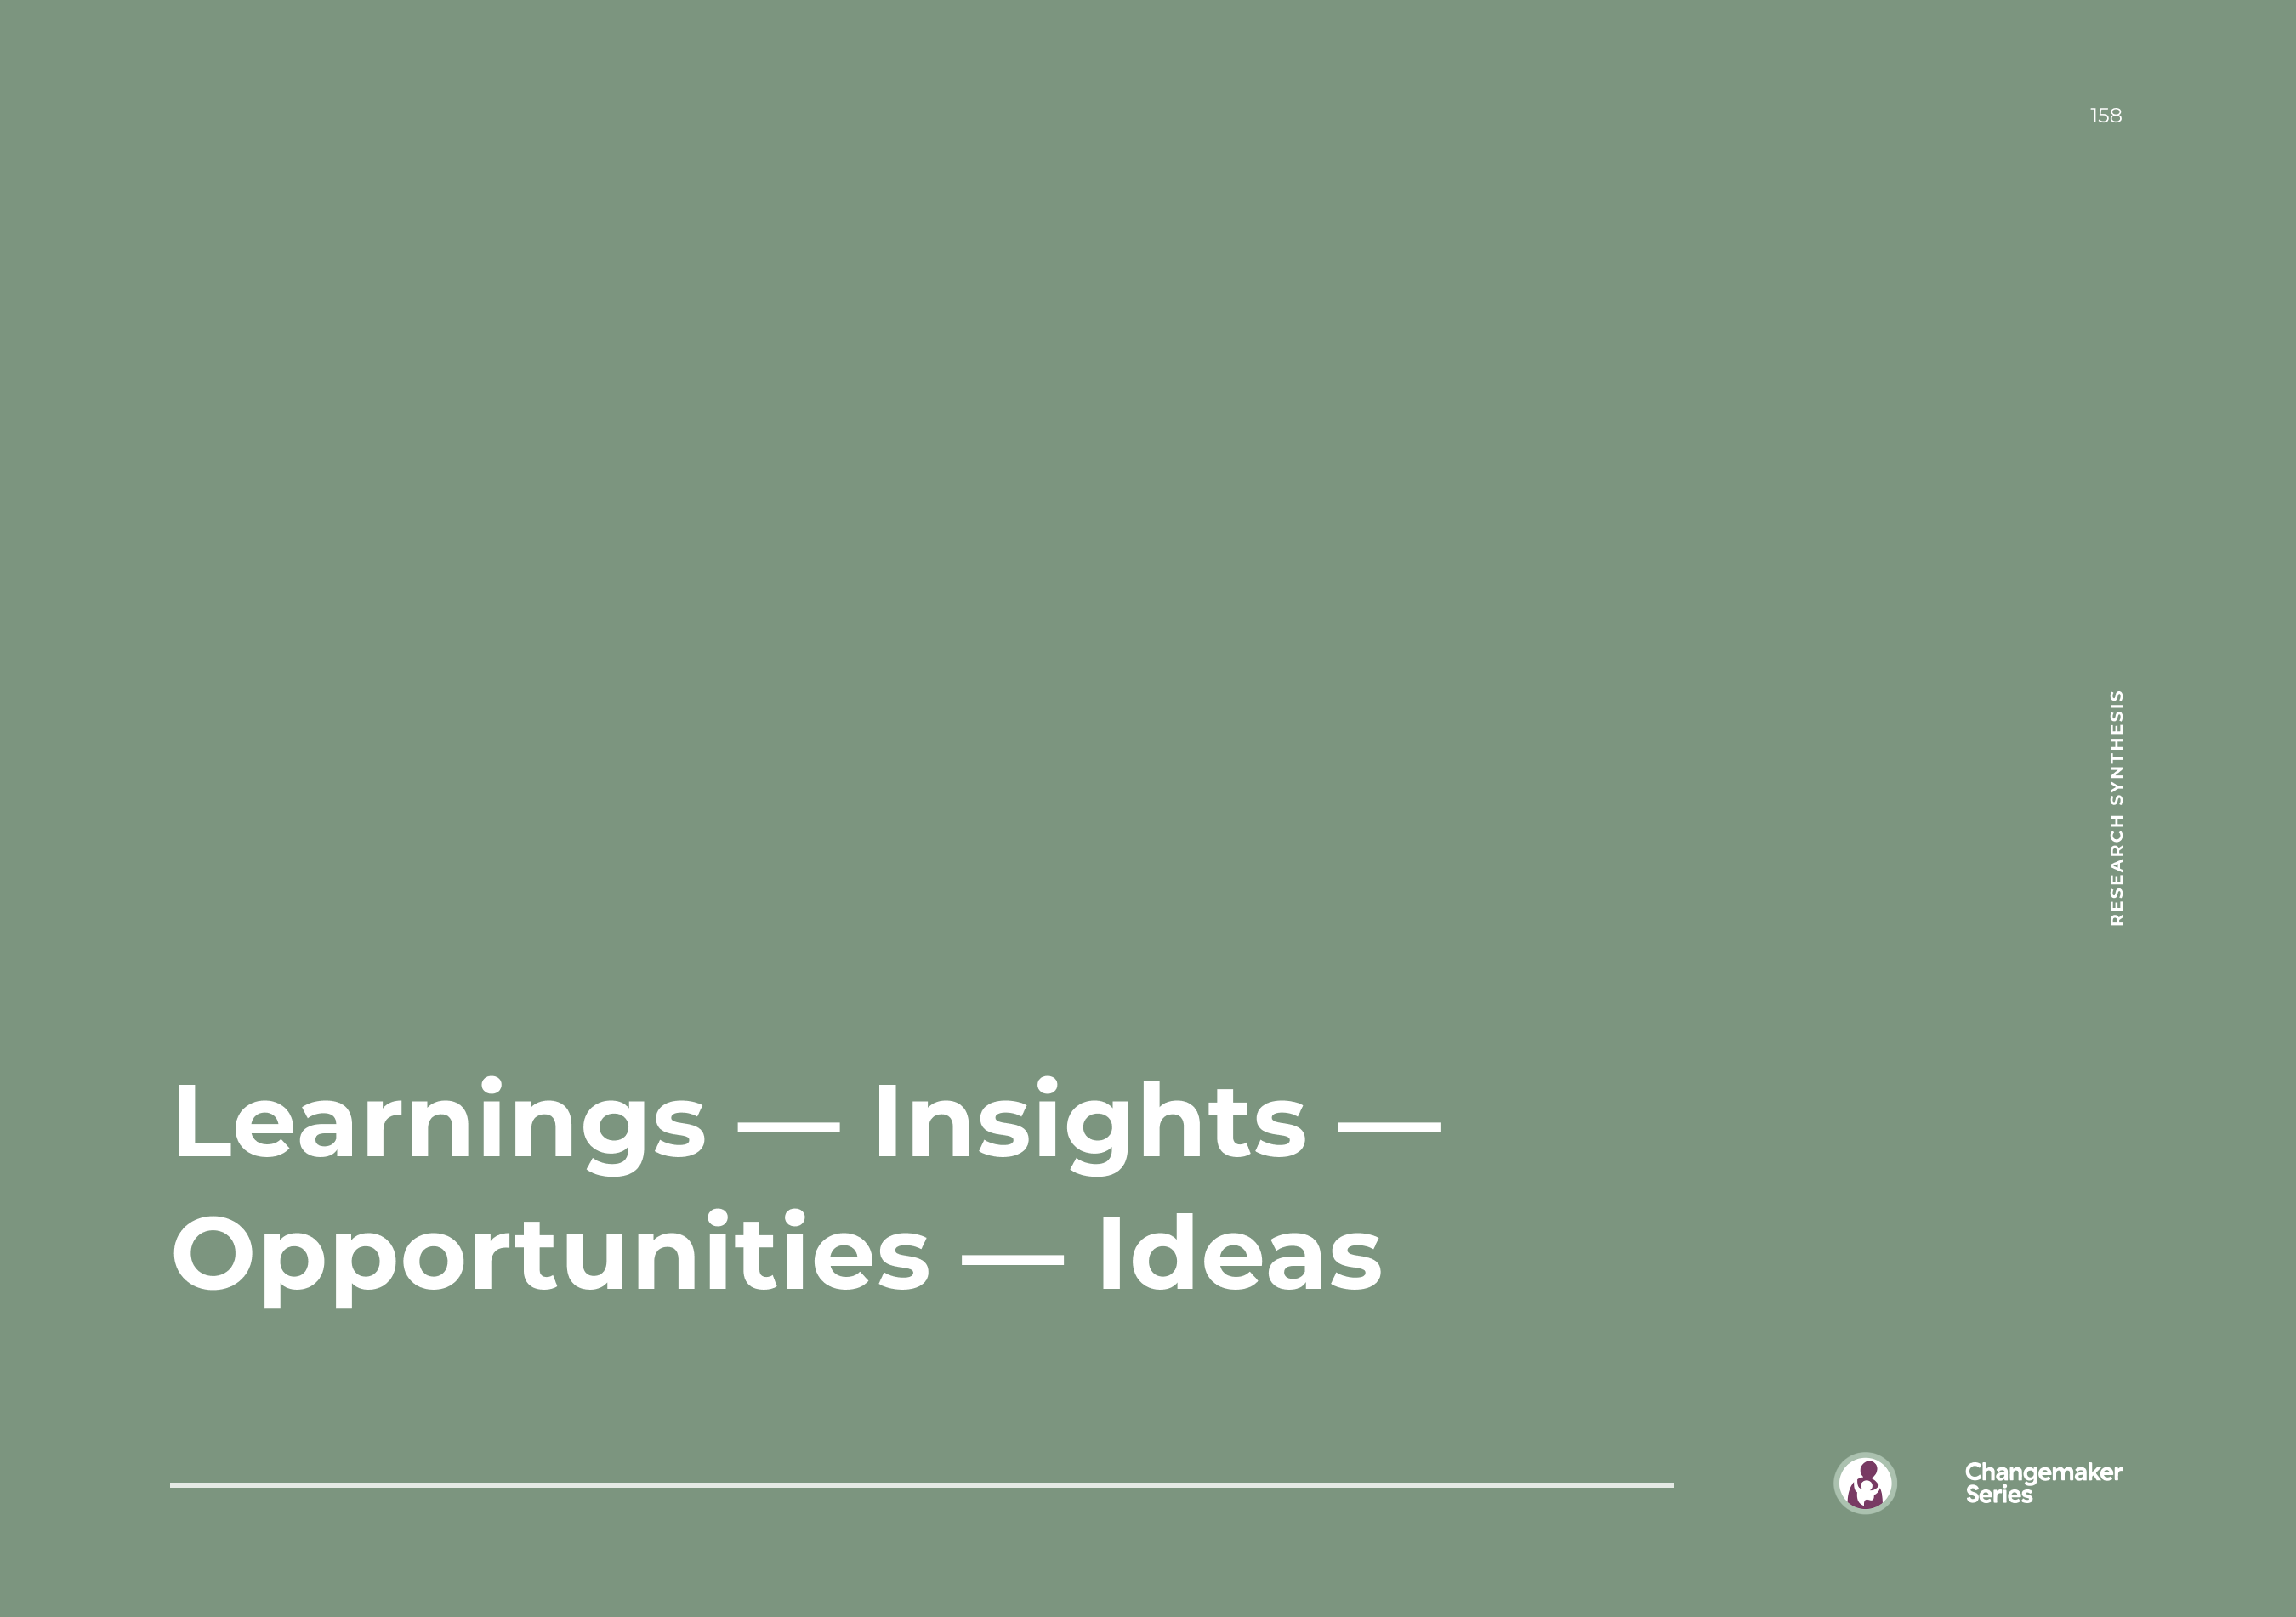 158_Learning-Insights-Opportunity-Ideas_2